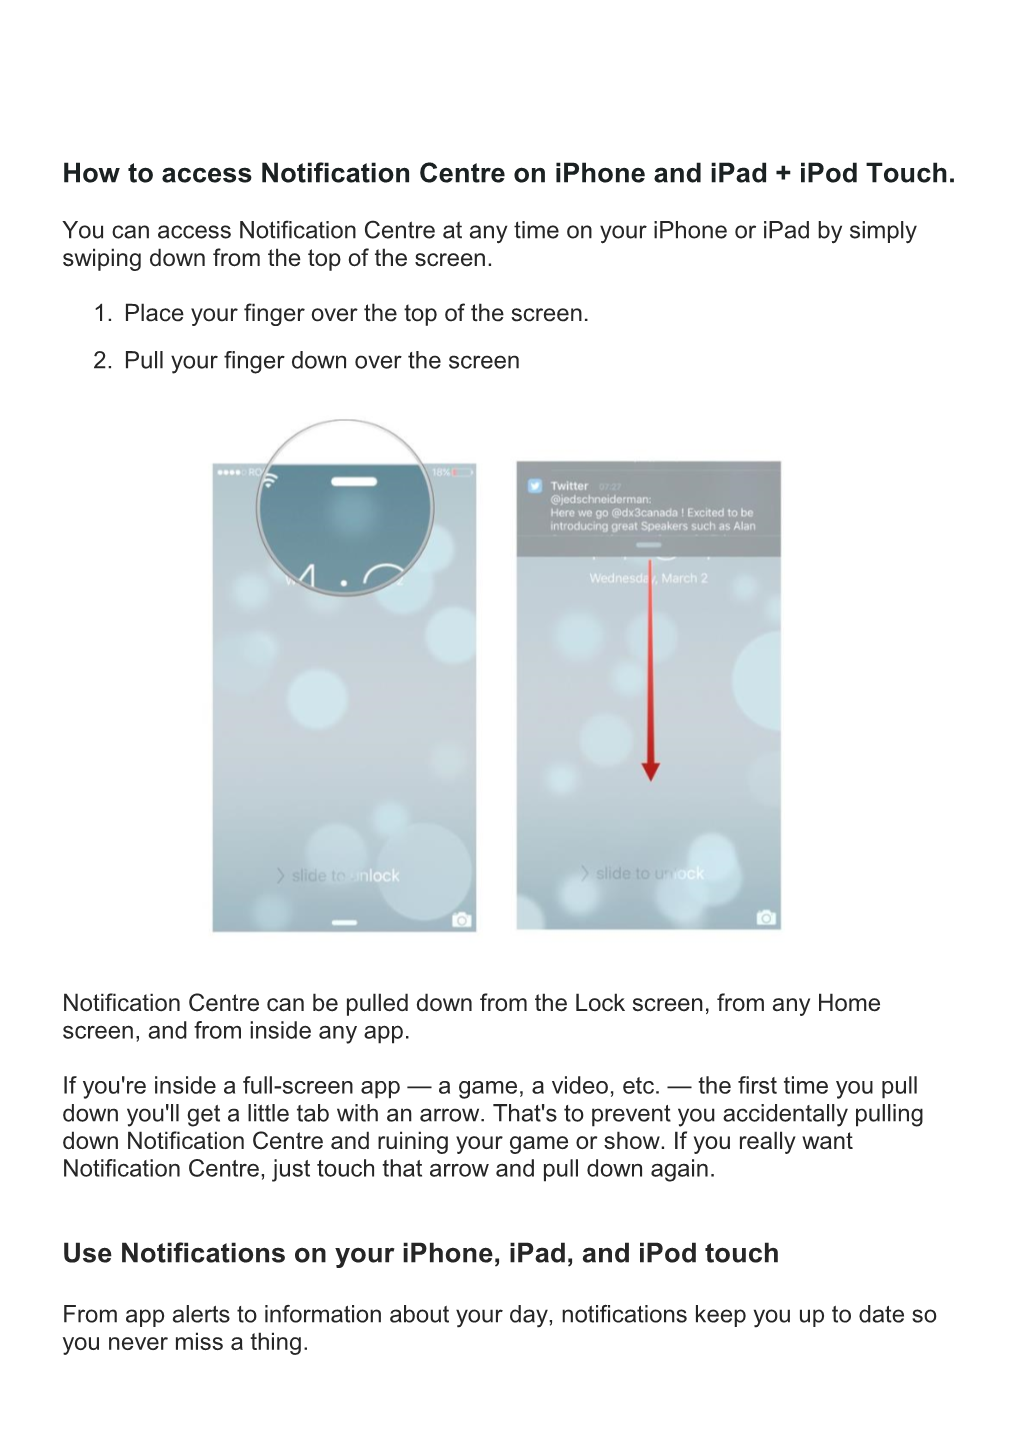 How to Access Notification Centre on Iphone and Ipad + Ipod Touch. Use